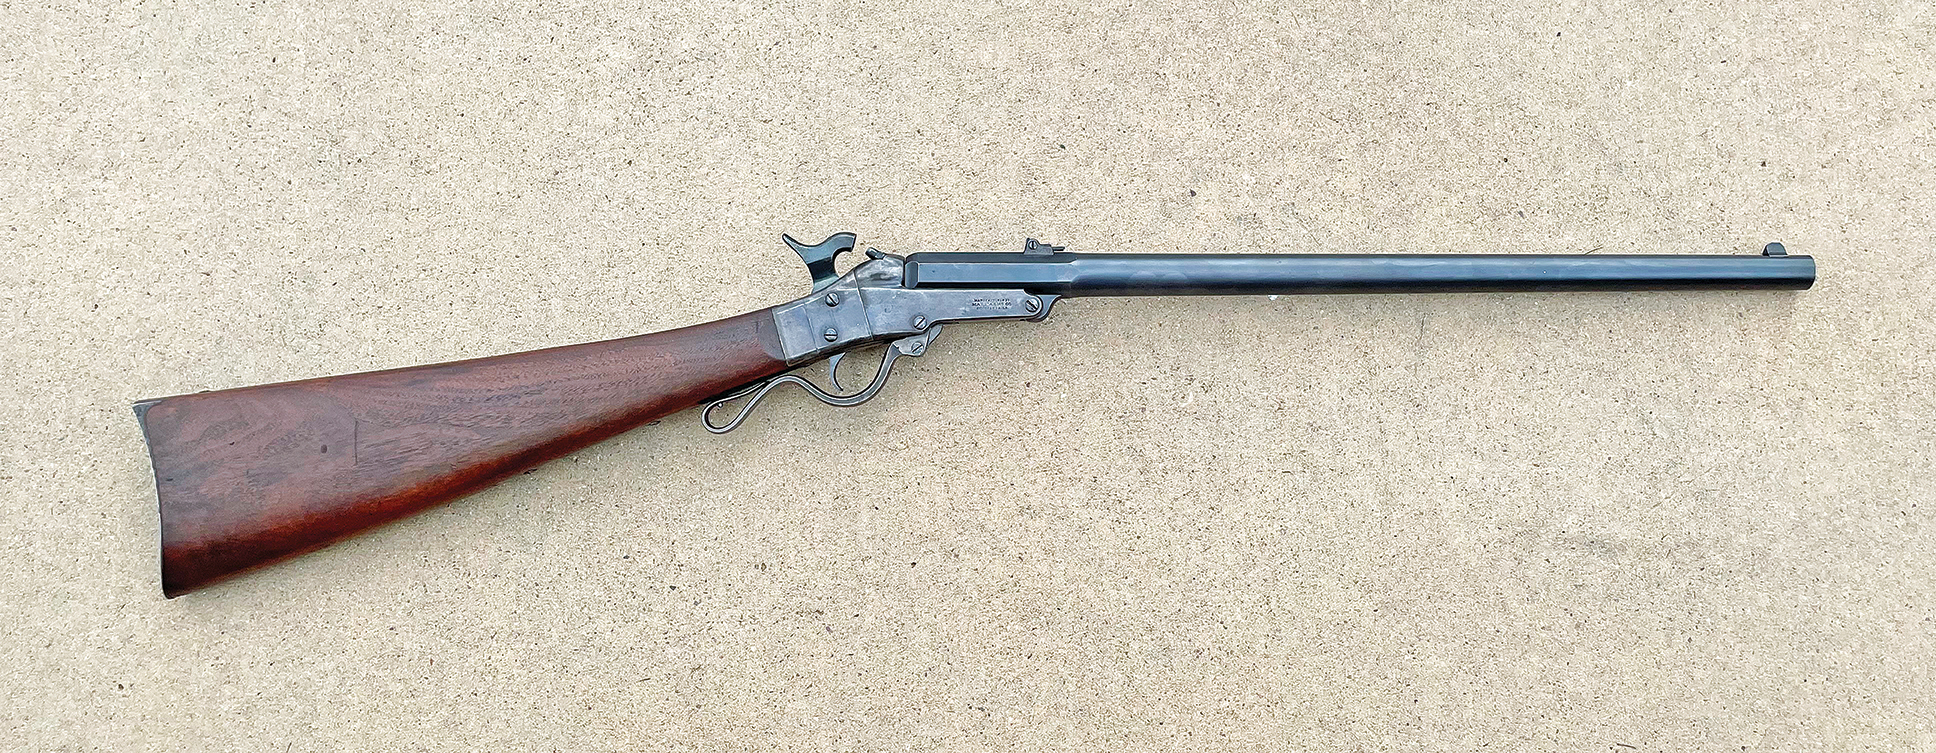 The .50 caliber Maynard percussion carbine as used in the Civil War, and afterwards by civilian hunters well into the late 1800s. The stock design and lack of a forearm look odd to us today, but the ergonomics are actually quite good. This helped keep the weight down to an amazingly low five pounds, 13 ounces, which made it very comfortable to carry.